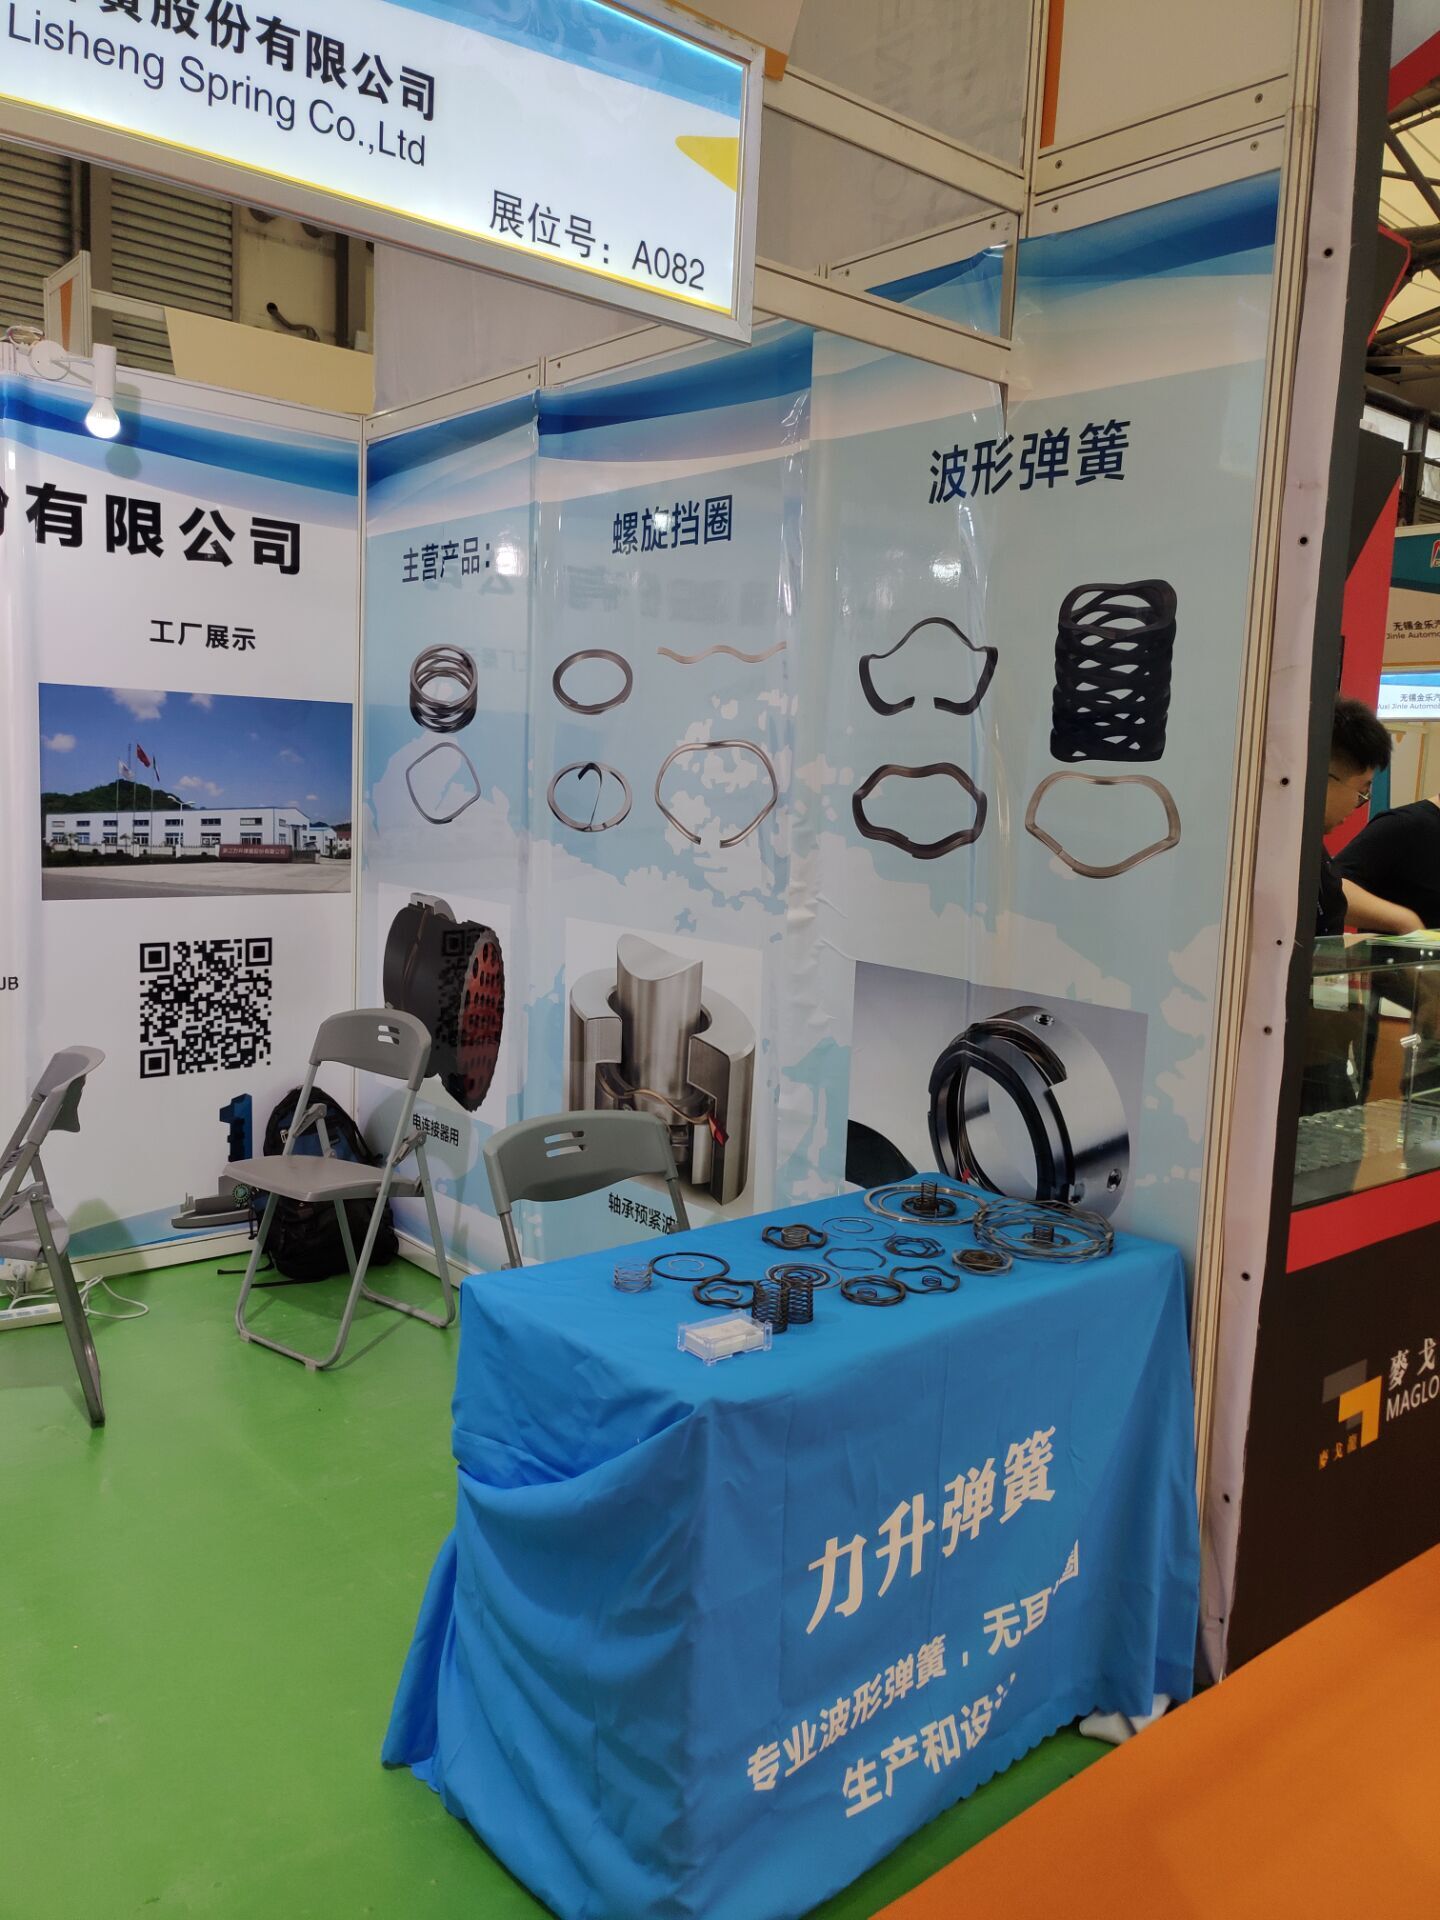 We attented The 19th China (International) Motor Expo And Forum2019 on 10-12 Jul. in Shanghai